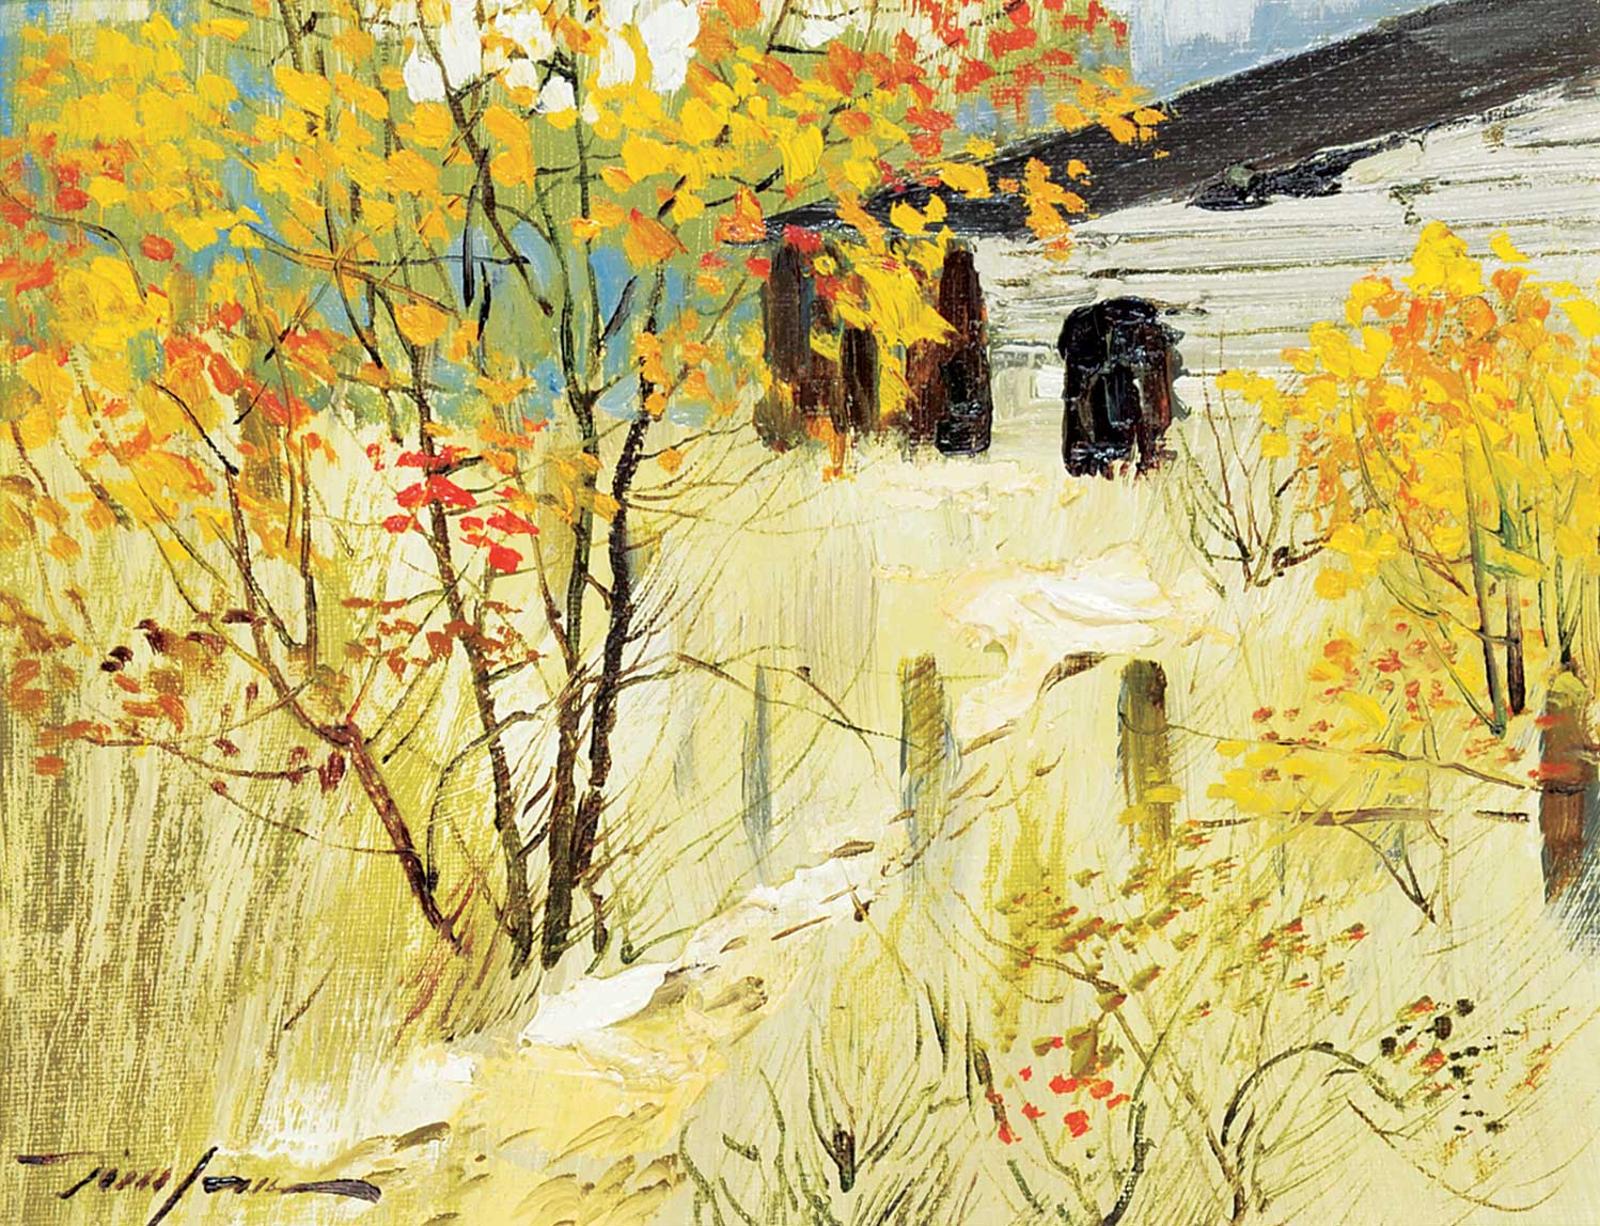 Tin Yan Chan (1942) - Untitled - Yellow Trees by the Barn